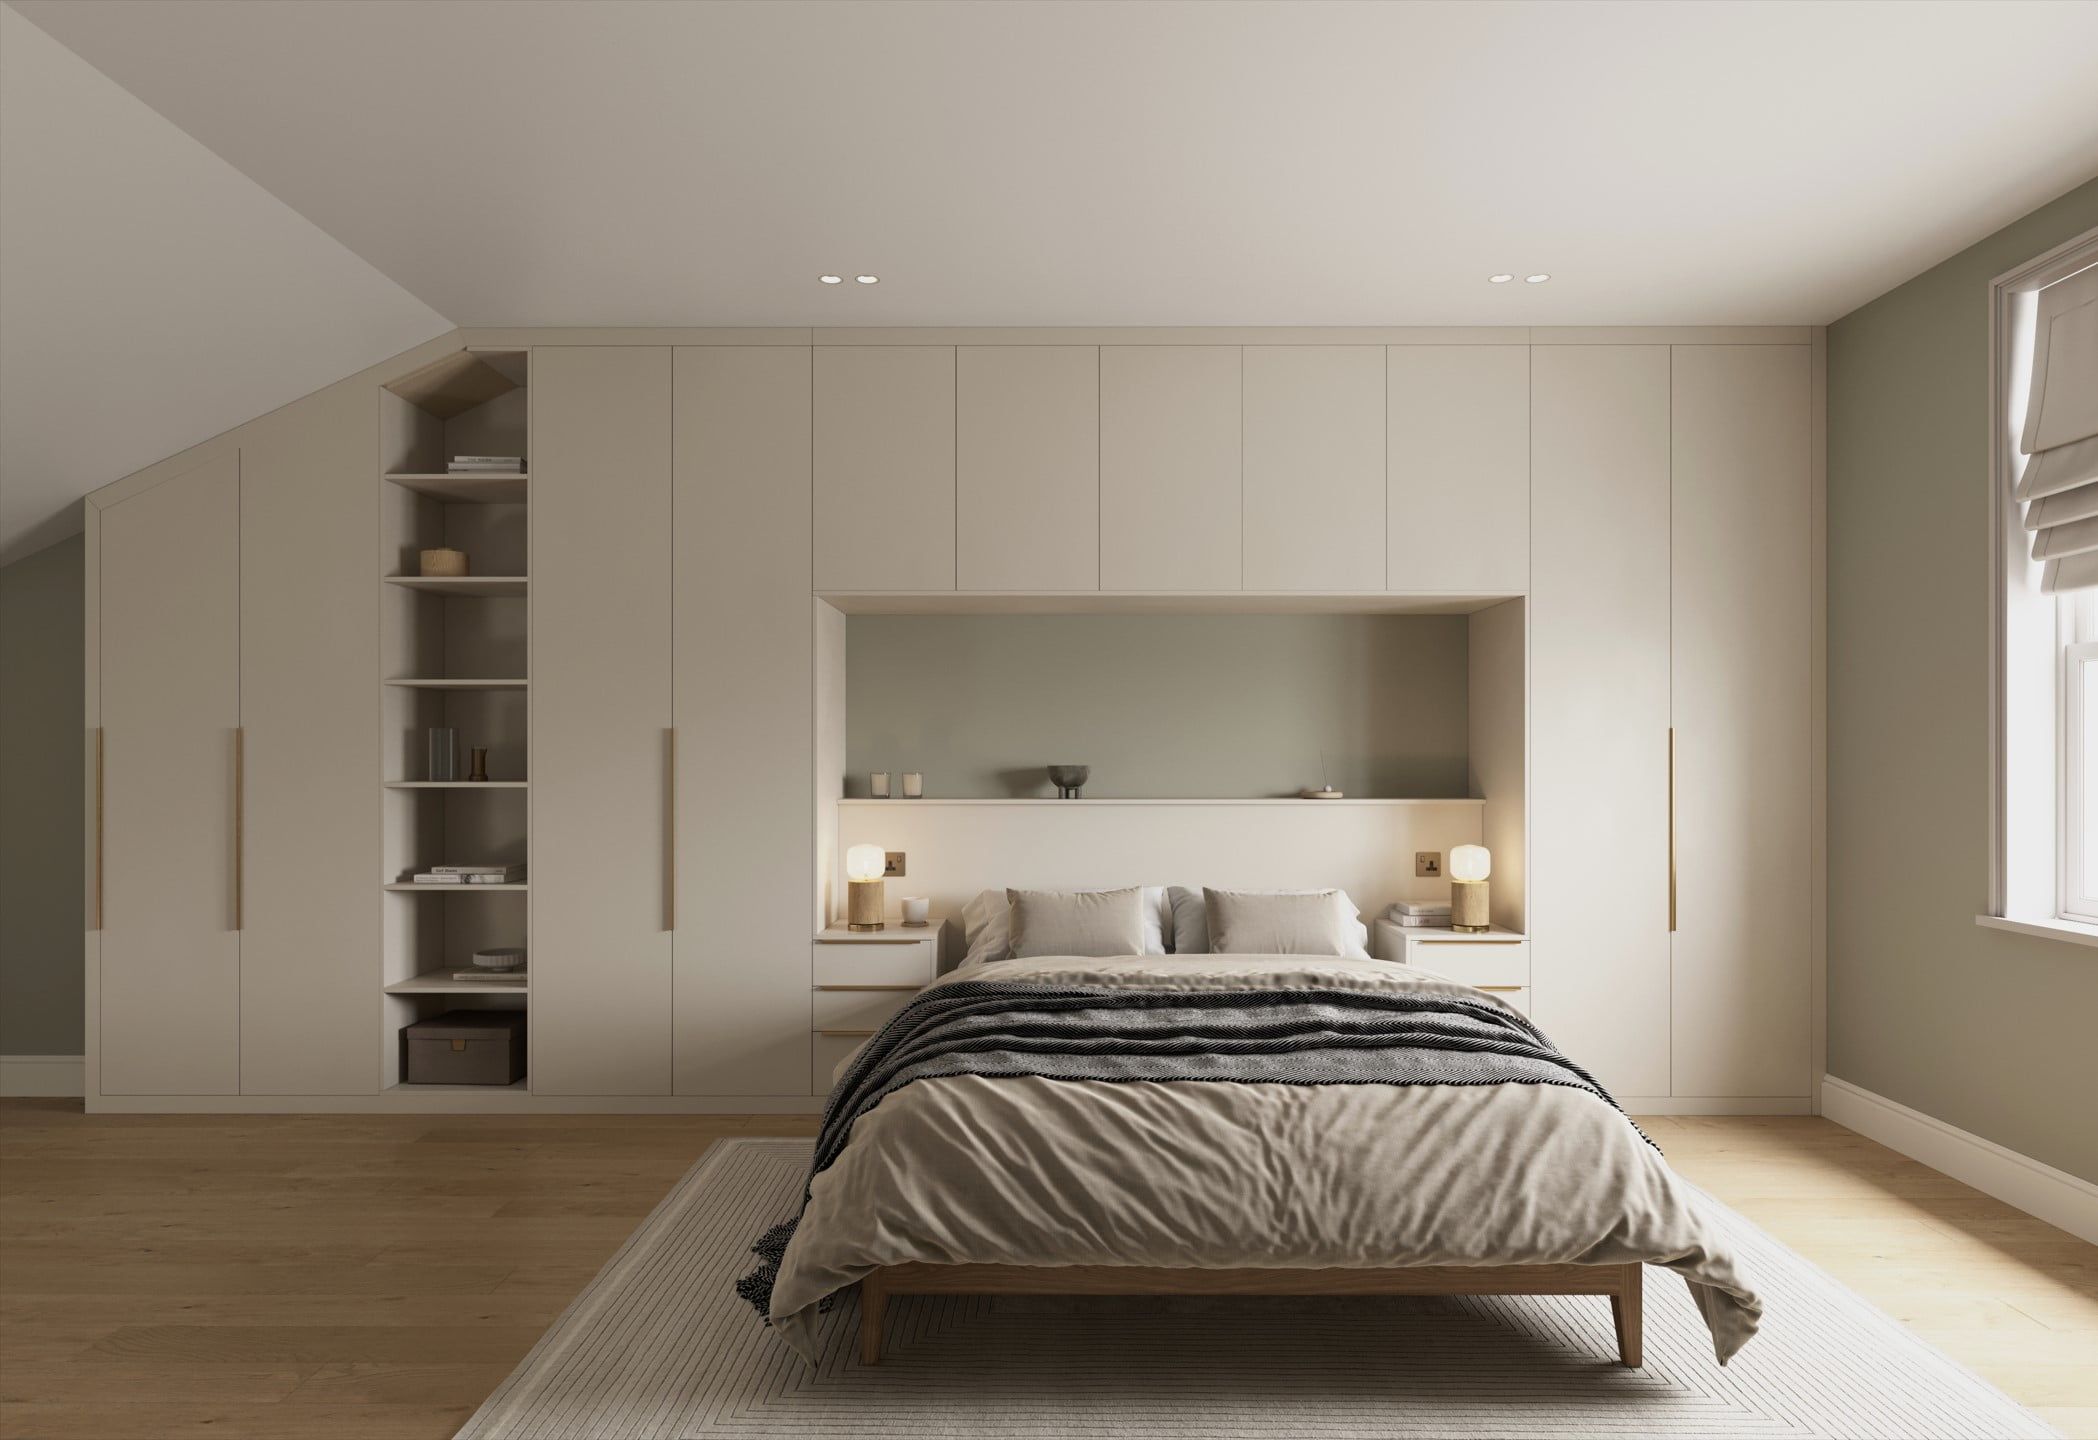 Overbed Fitted Wardrobes And Storage Units, Bespoke Overhead Storage Throughout Wardrobes Beds (View 9 of 15)